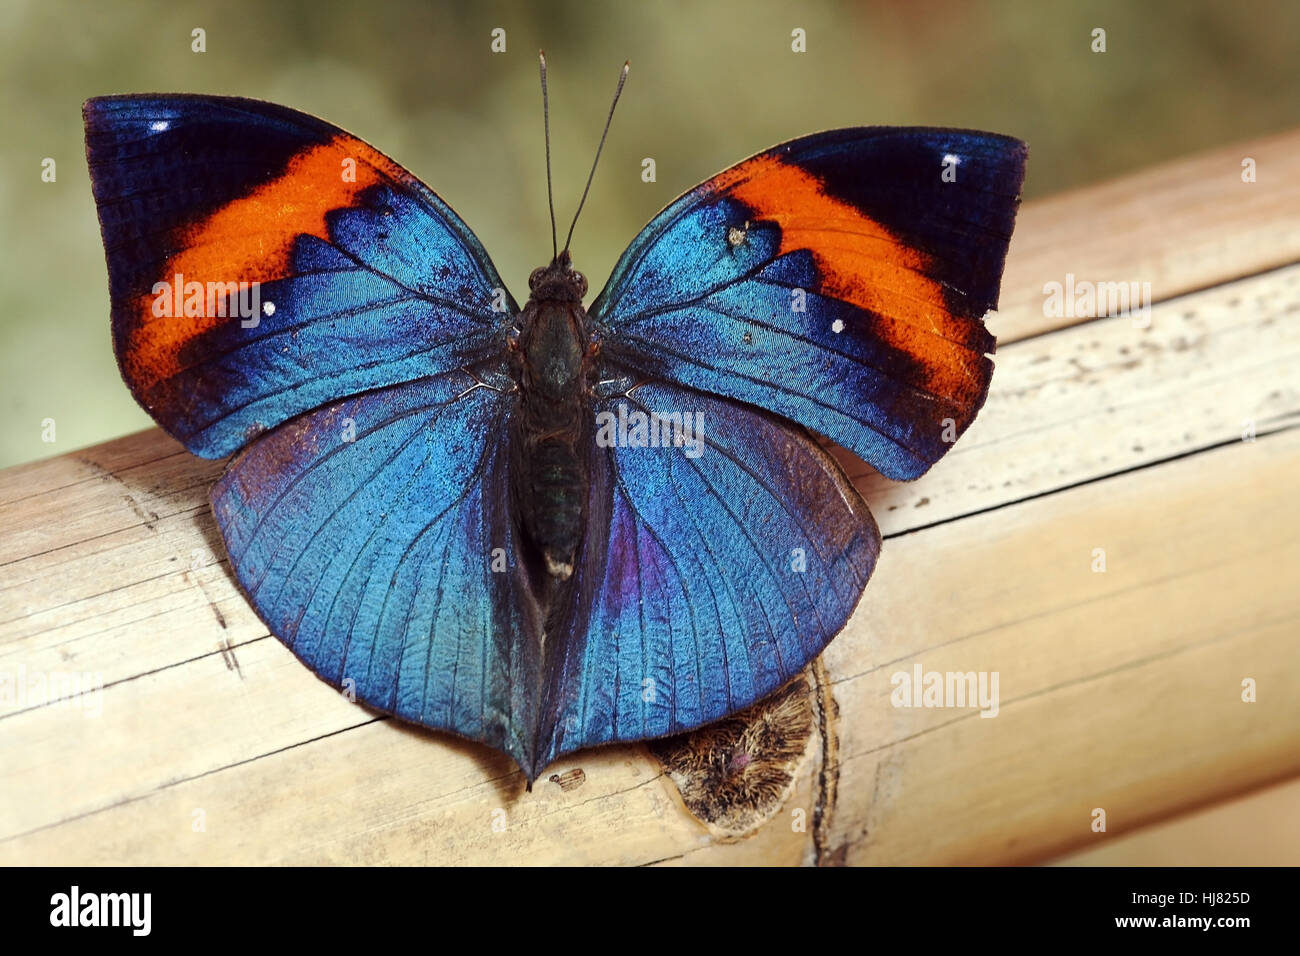 the indian journal or malaysian leaf butterfly Stock Photo